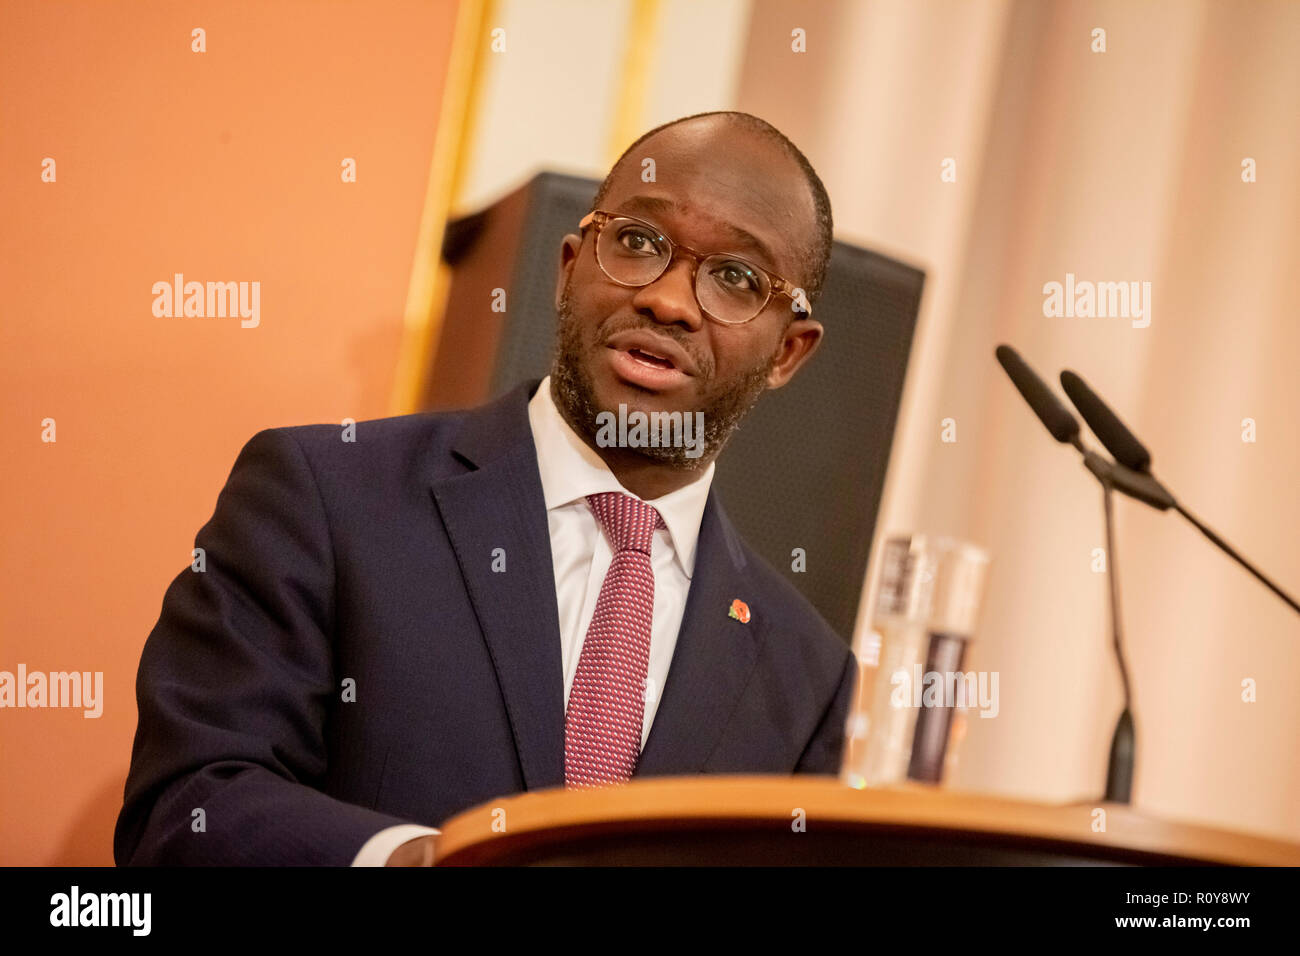 Berlin, Germany. 07th Nov, 2018. Sam Gyimah, Minister for Universities, Science, Research and Innovation of Great Britain, will speak at the Berlin Science Award 2018 and the Young Investigators Award 2018. Credit: Christoph Soeder/dpa/Alamy Live News Stock Photo